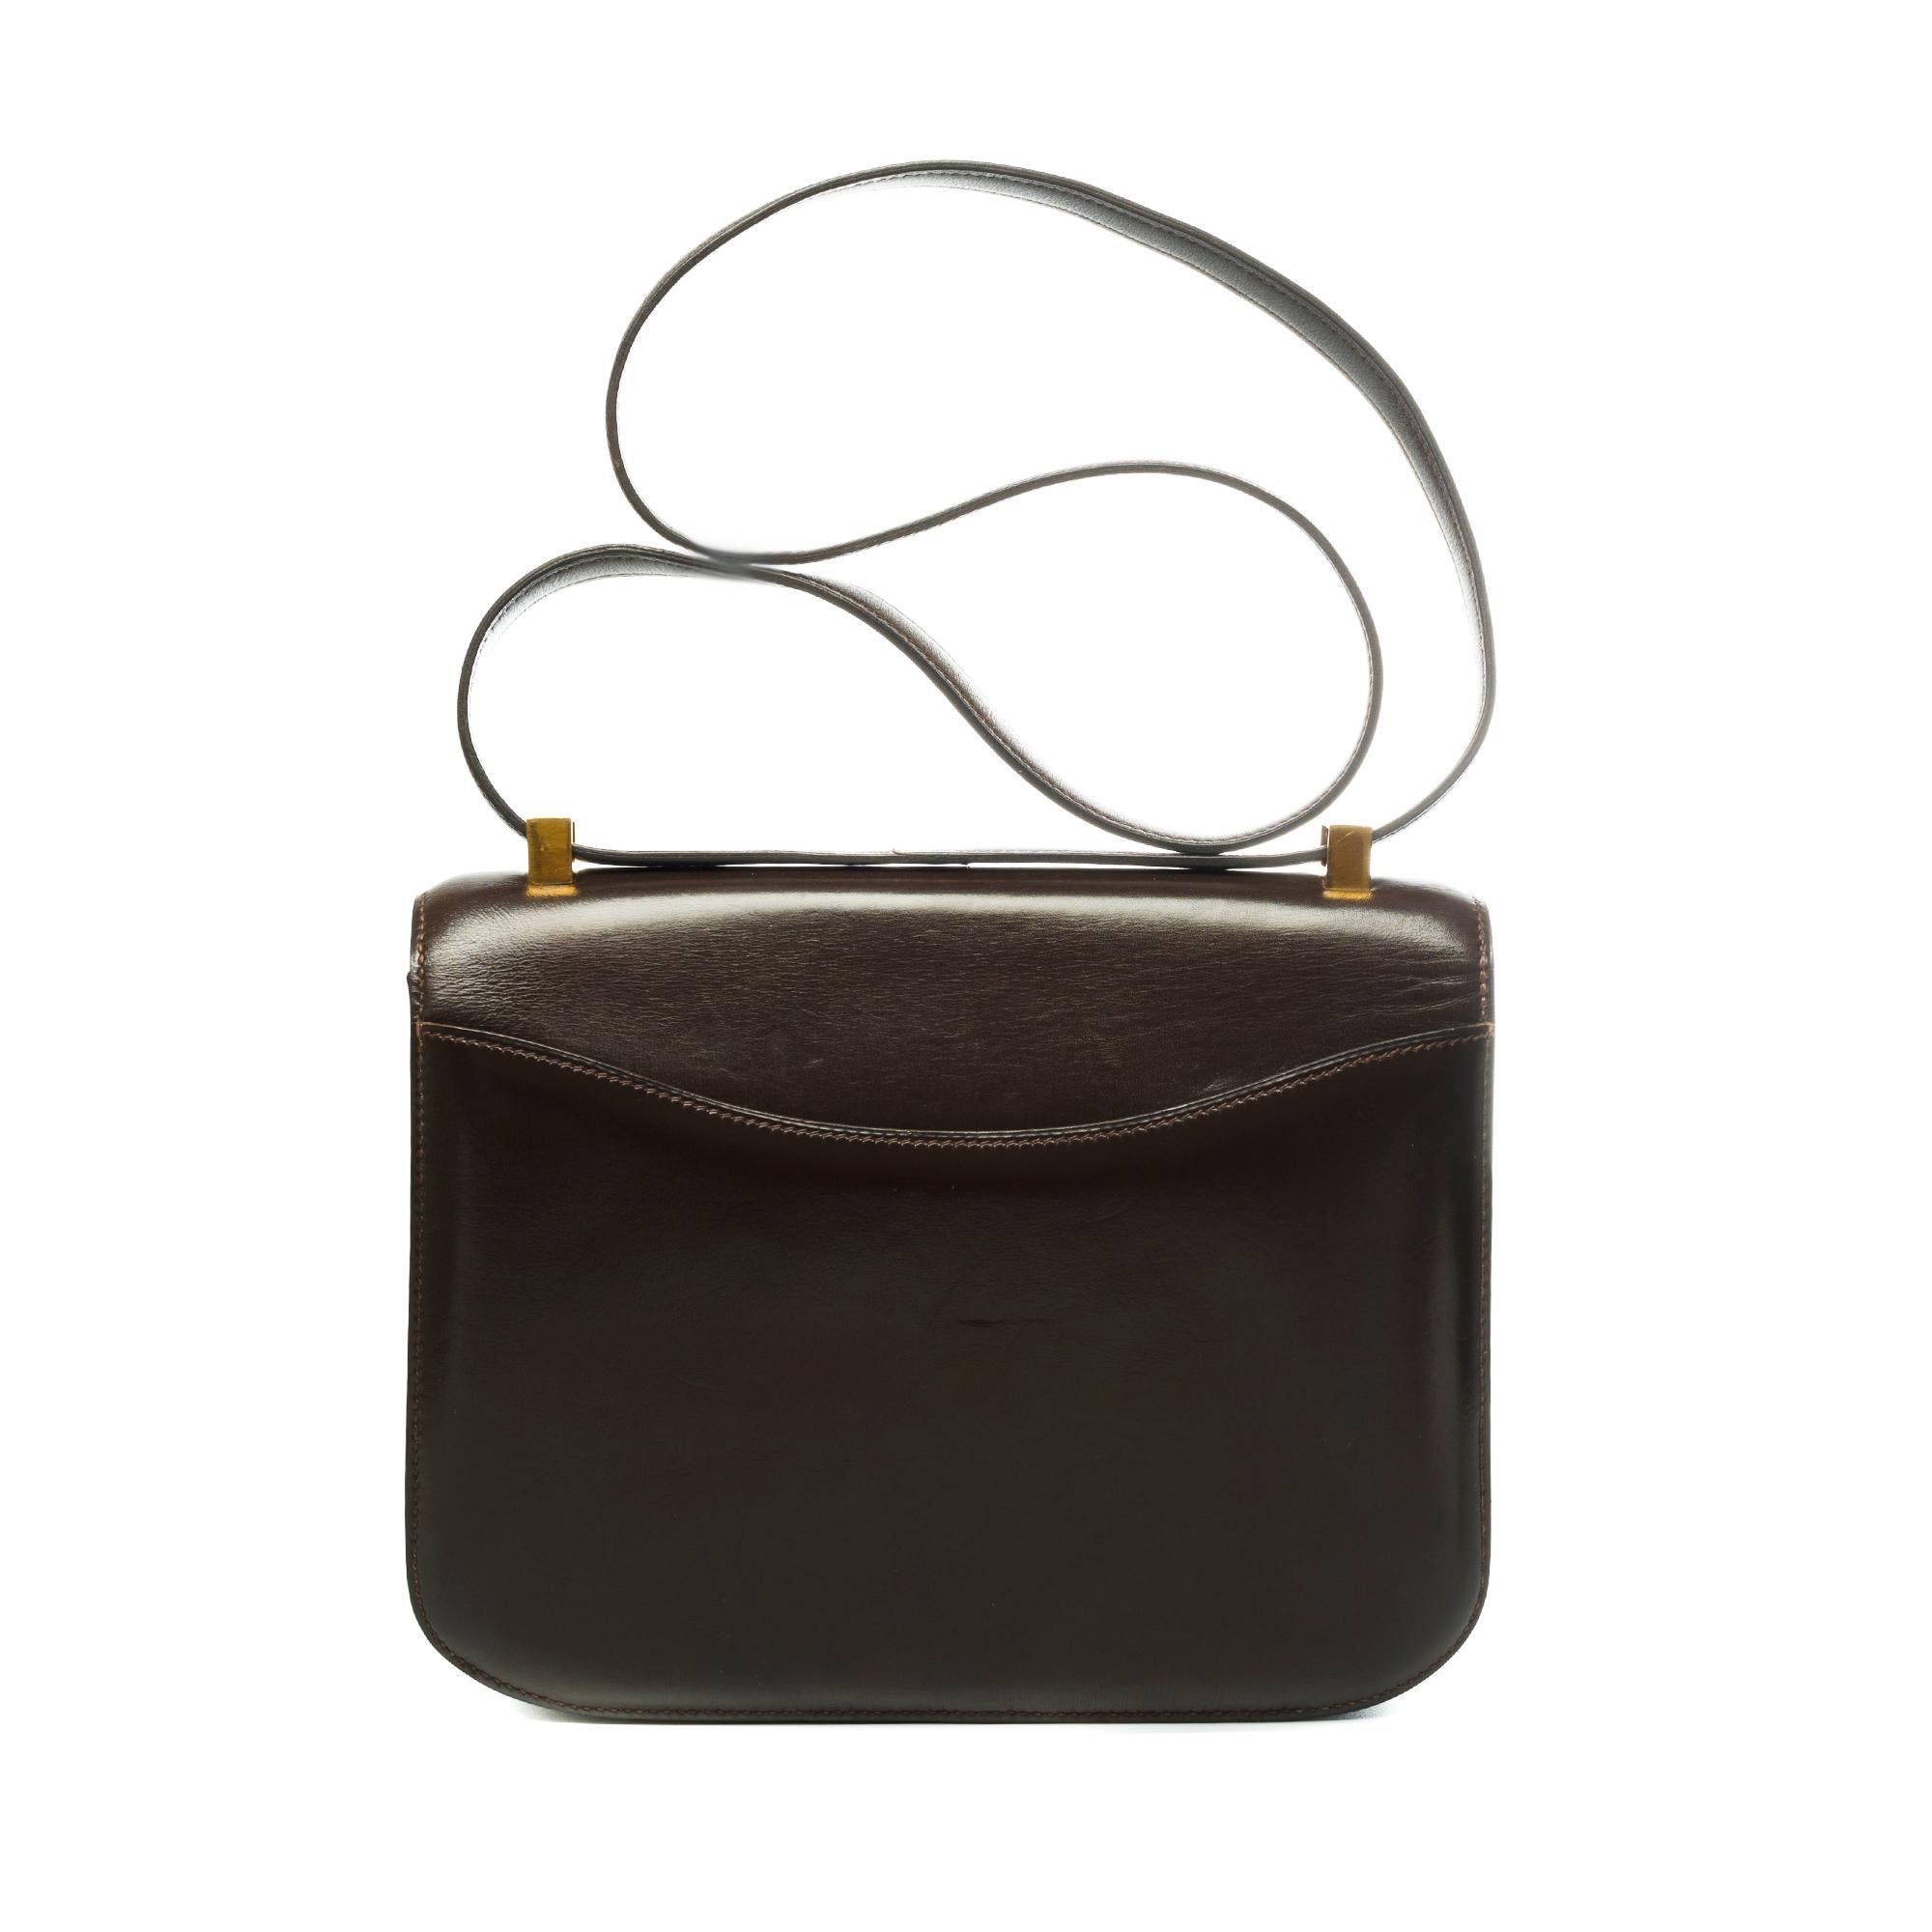 Splendid Hermes Constance Handbag 23 cm in brown box leather, gold metal hardware, brown leather handle transformable allowing a hand or shoulder support.

Closure marked H on flap.
A patch pocket on the back of the bag.
Lining in brown leather, a